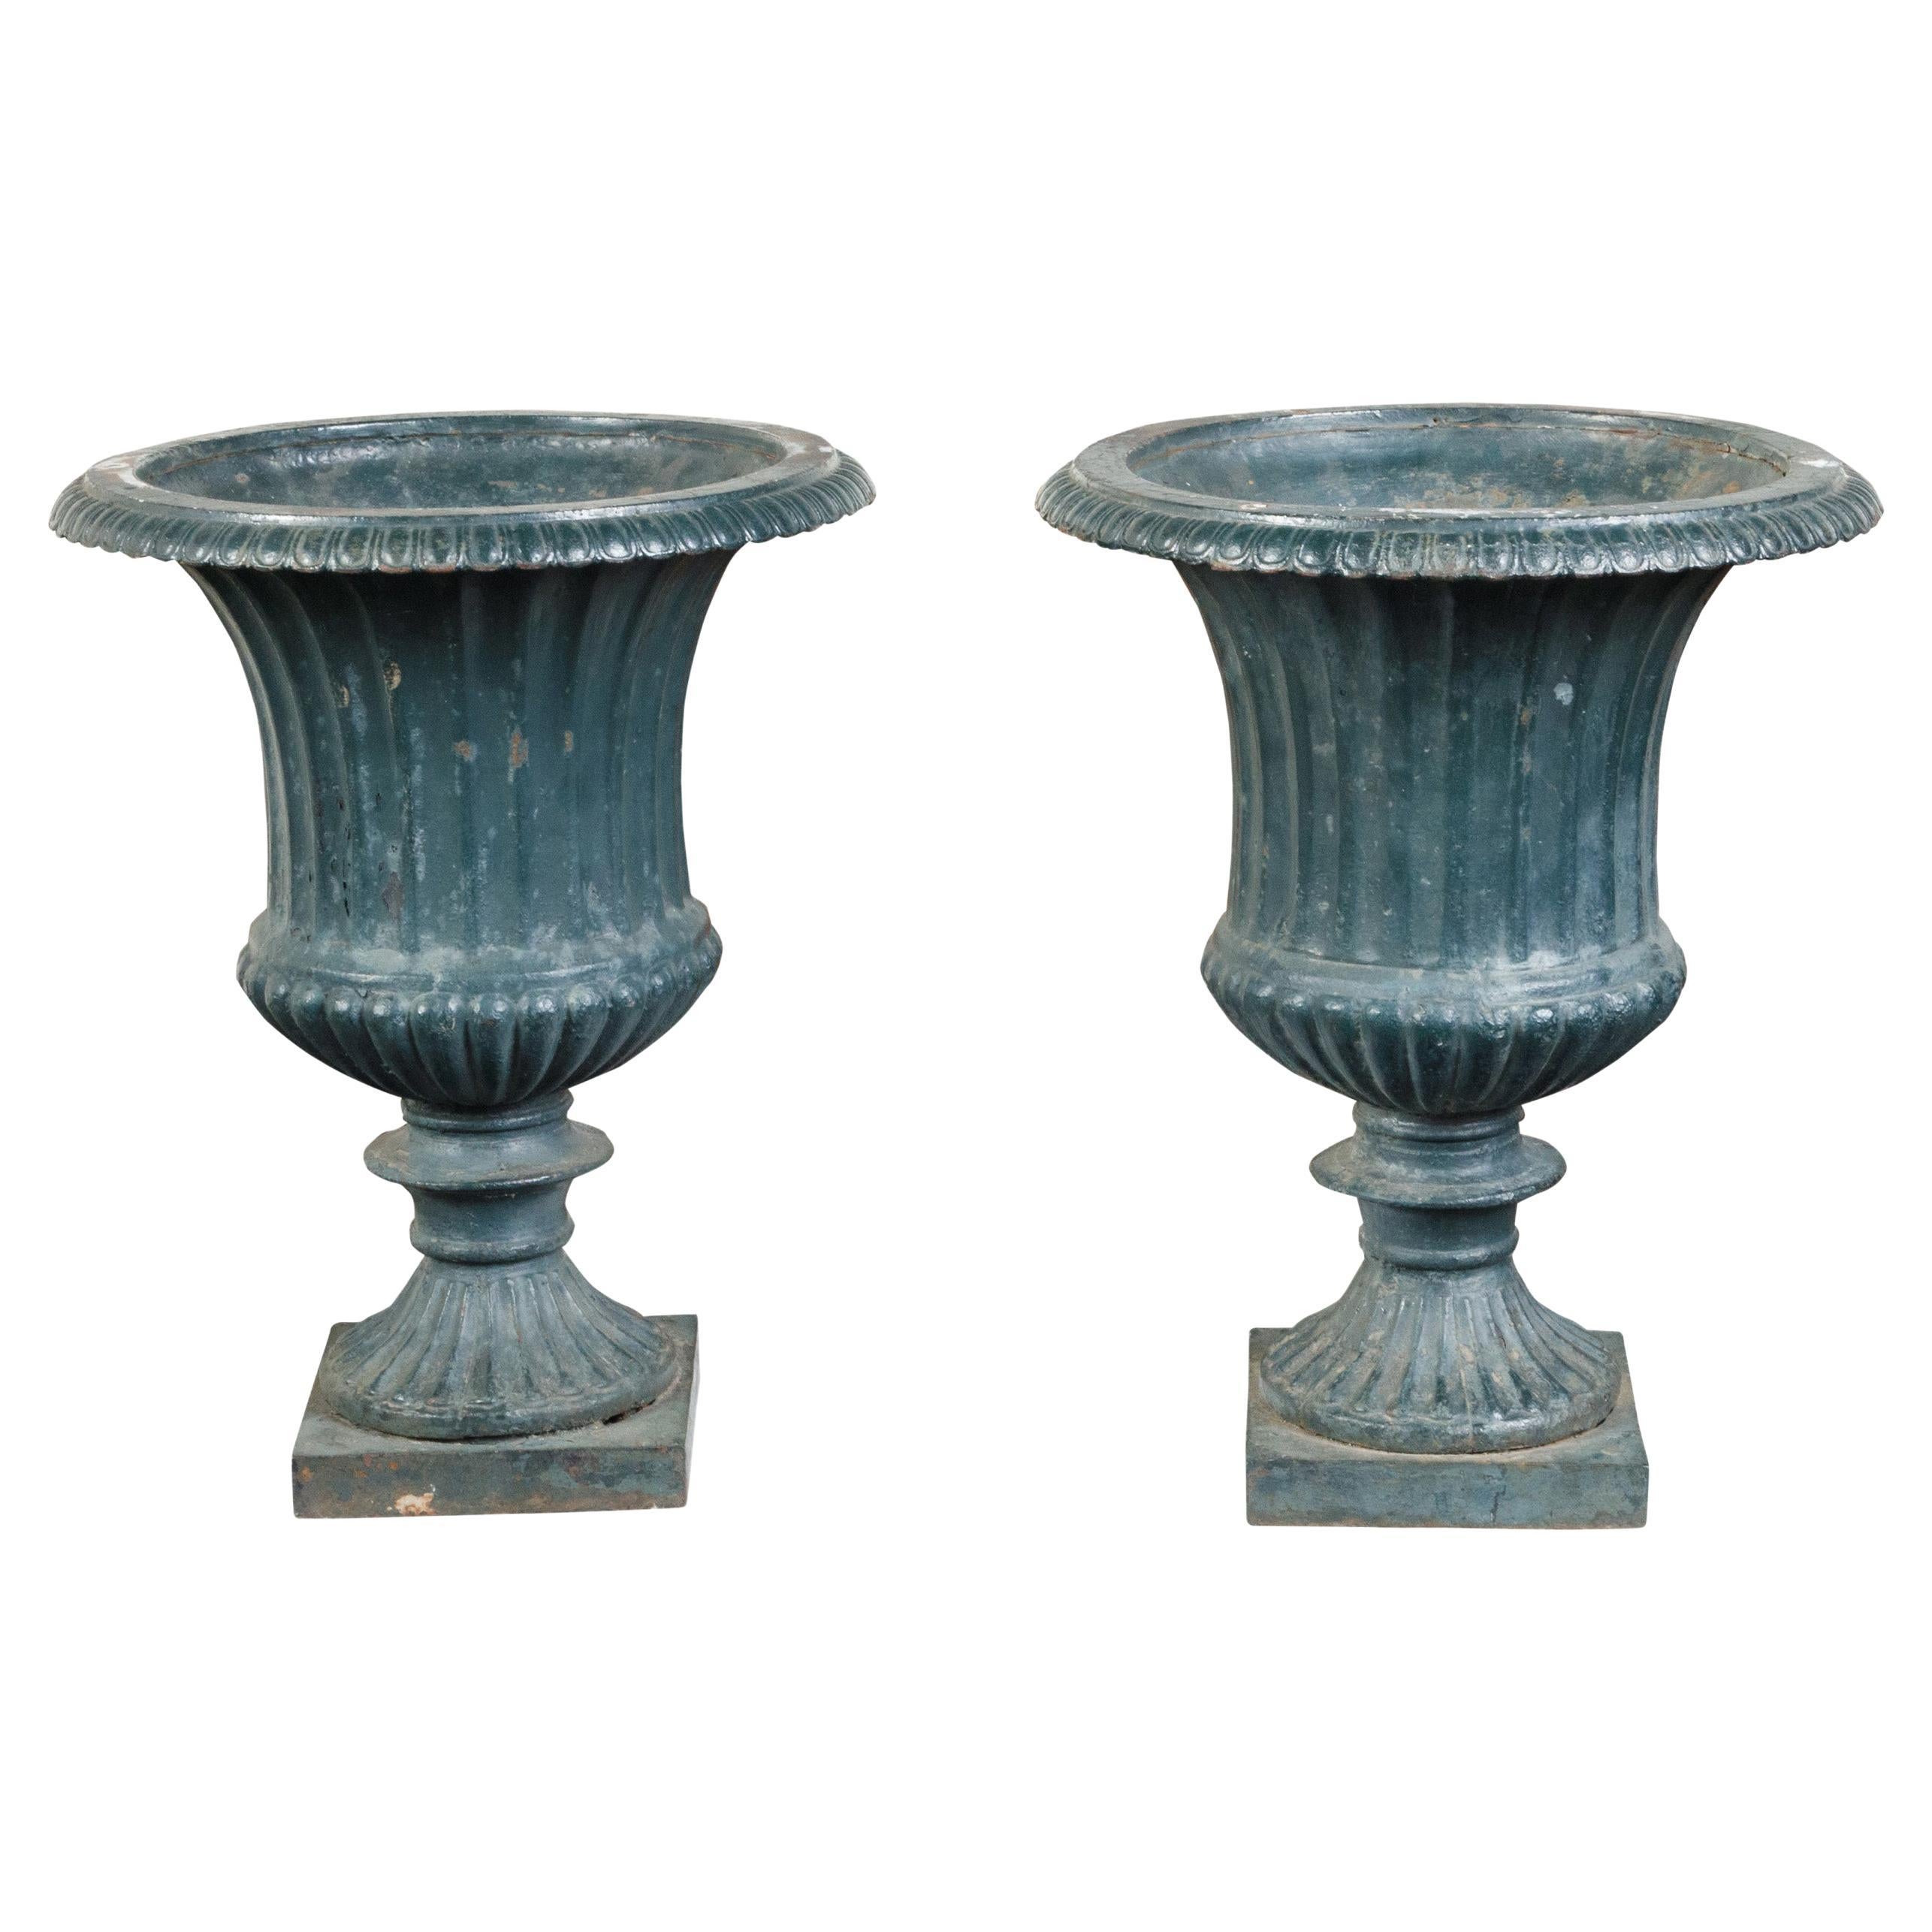 Pair of 19th Century English Medici Urn Planters on Petite Square Bases For Sale